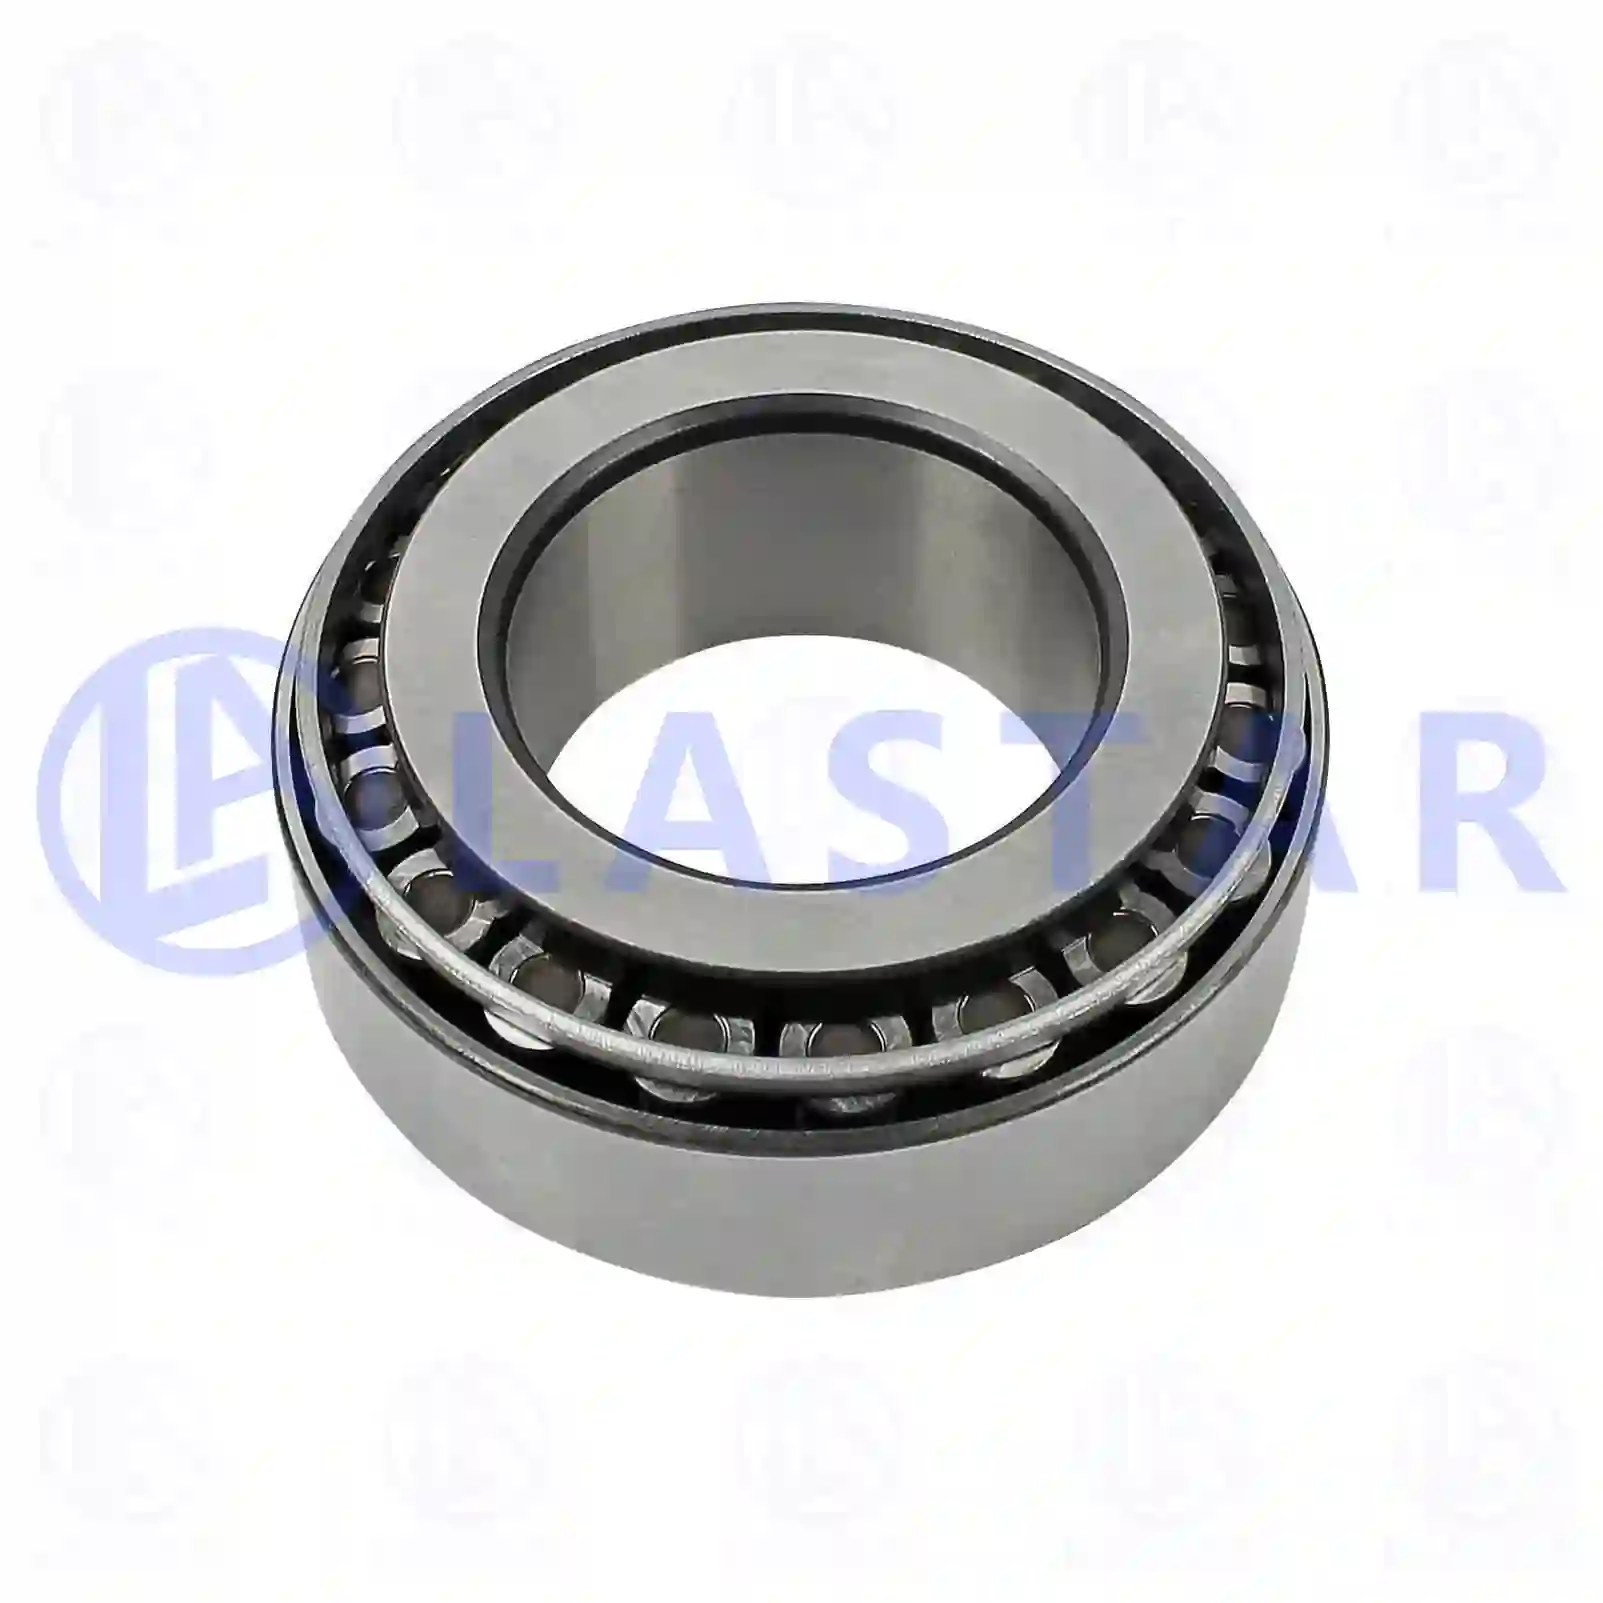 Bearings Tapered roller bearing, la no: 77725221 ,  oem no:01905236, 07165686, 07172895, 1905236, 5010439061, 7165686, 0049816405, 0049816505, 0049816705, 0069816005, 5010242776, 5010439061, 4200005800, ZG03016-0008 Lastar Spare Part | Truck Spare Parts, Auotomotive Spare Parts